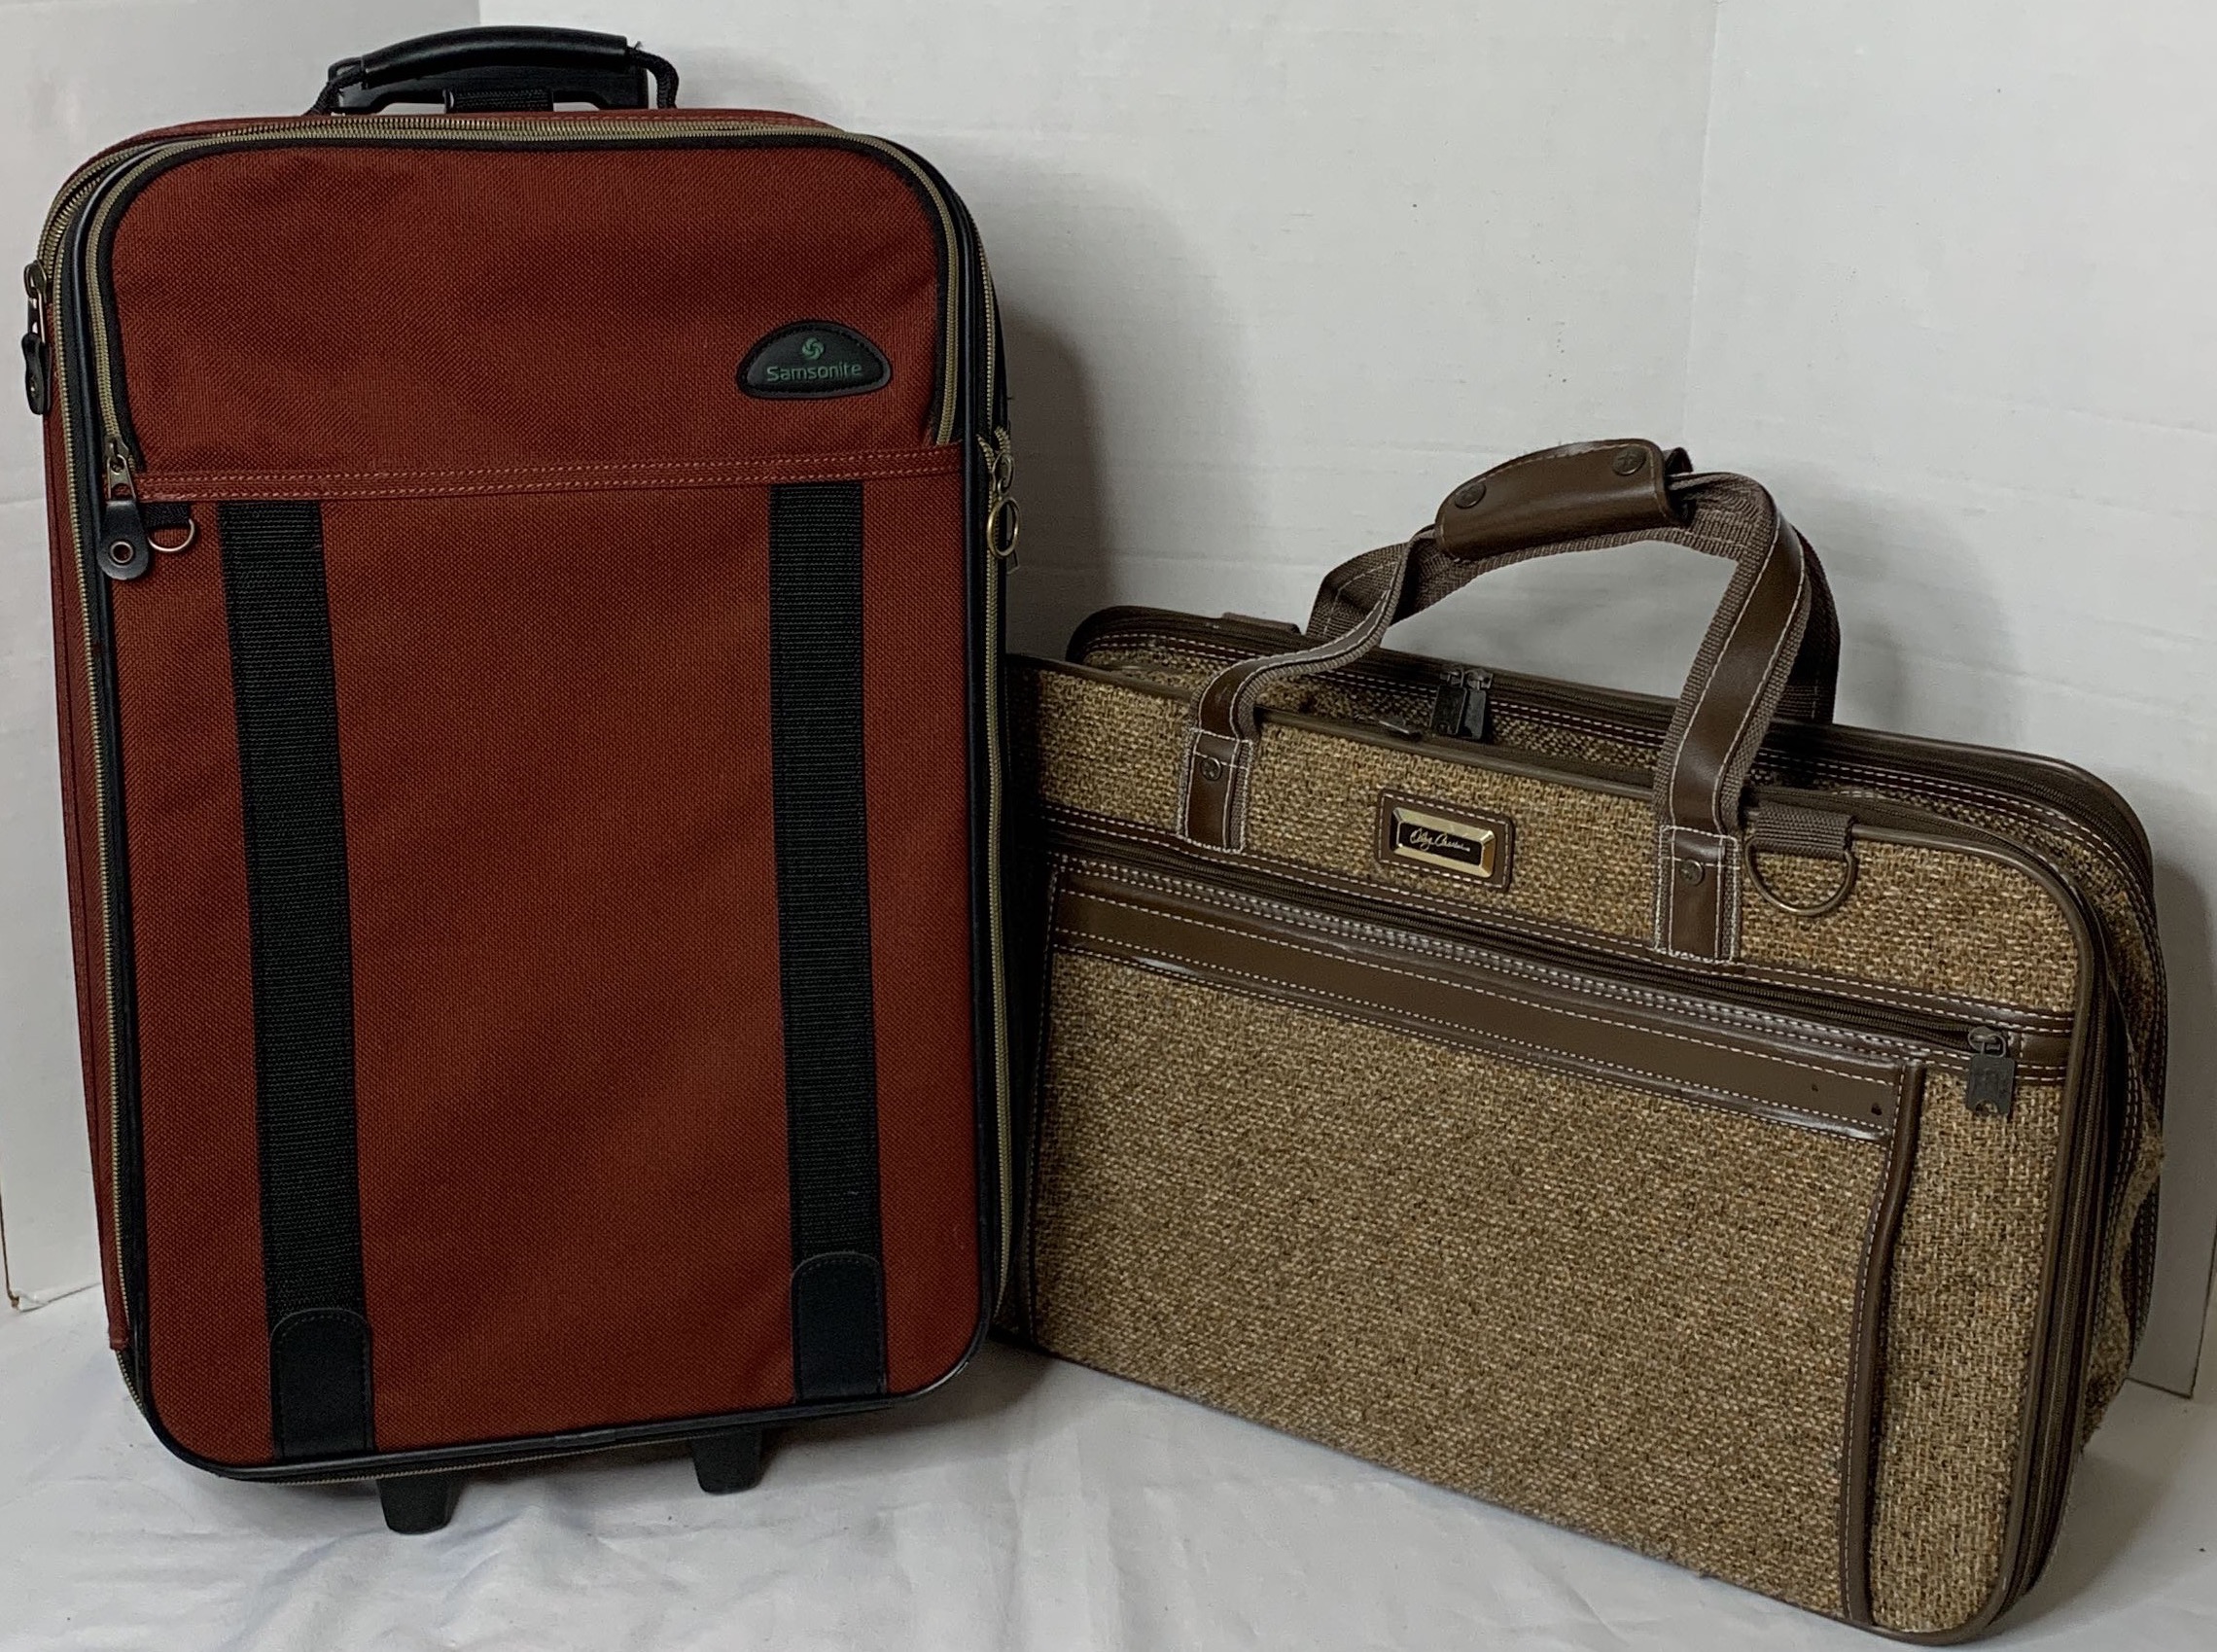 Vintage Hartmann Beige Leather decorated Luggage Suitcase - general for  sale - by owner - craigslist